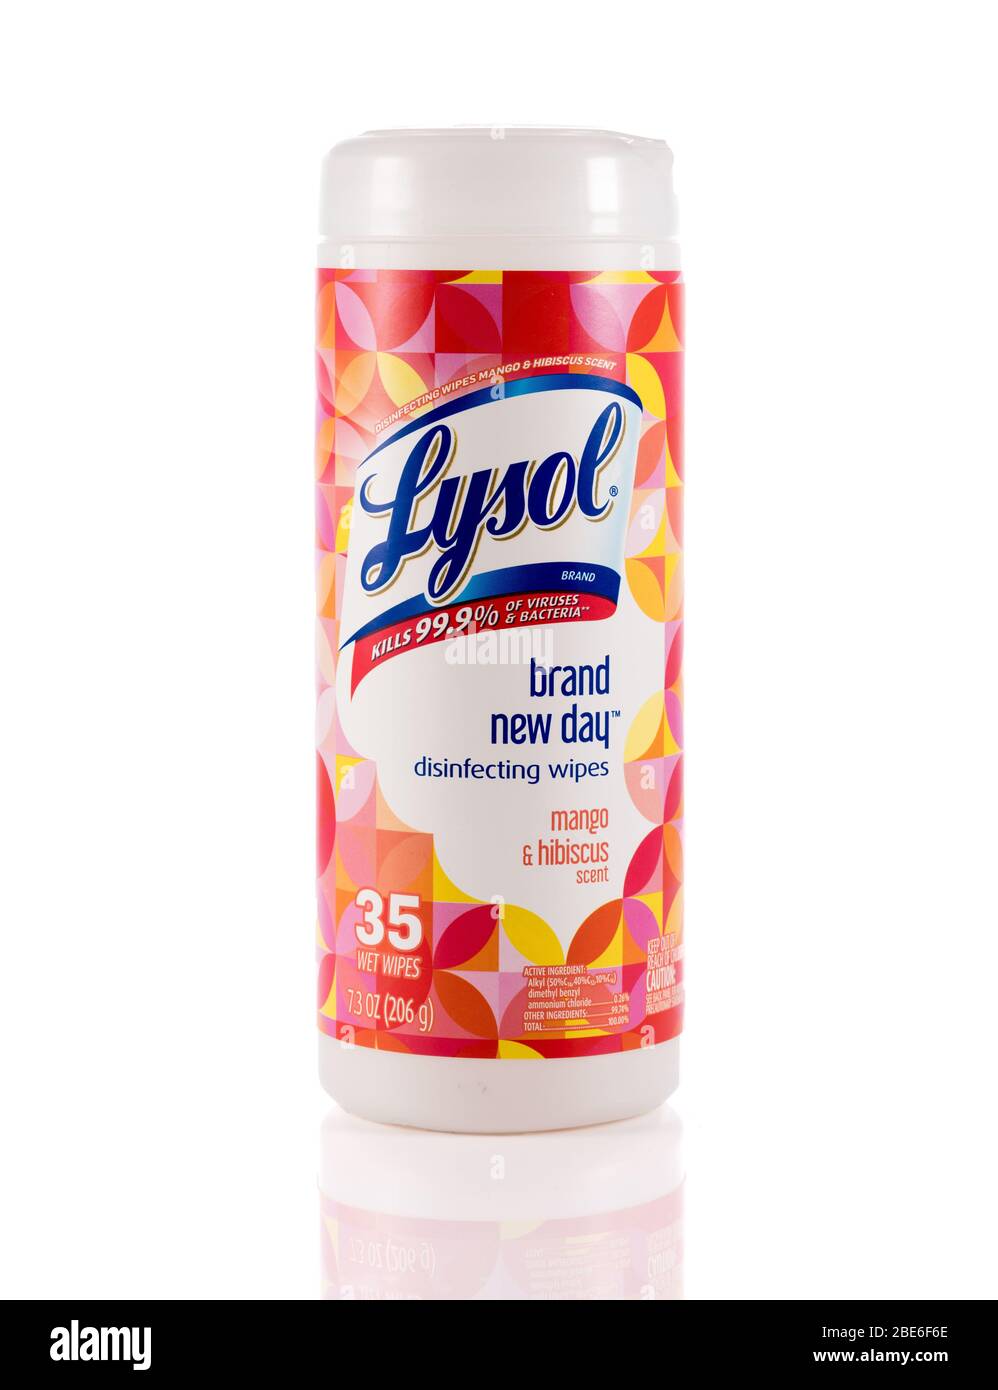 Morgantown, WV - 12 April 2020: Canister of mango and hibiscus Lysol disinfecting wipes on white background Stock Photo